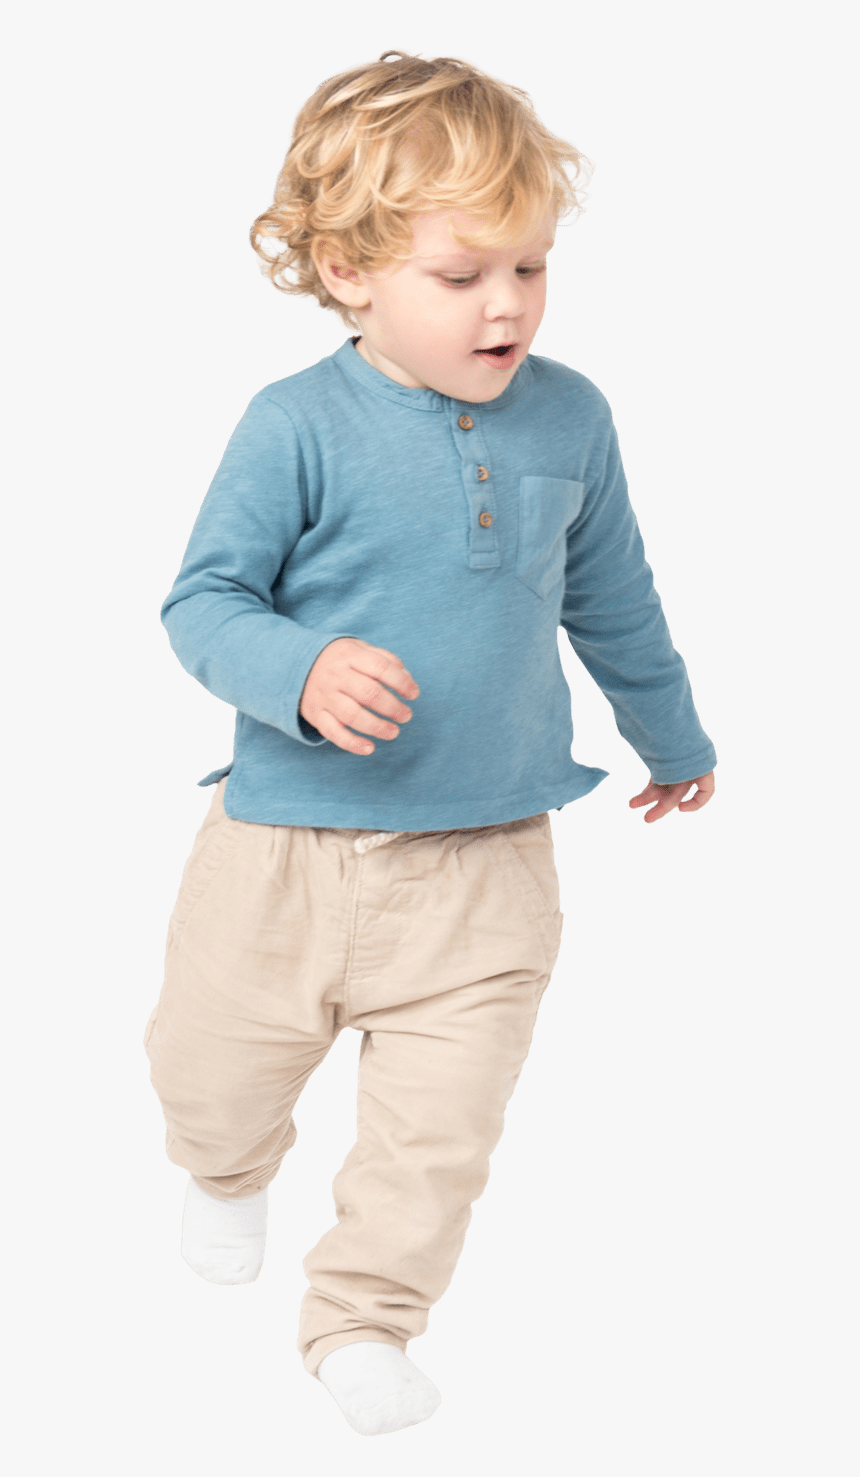 Kids - Standing, HD Png Download, Free Download